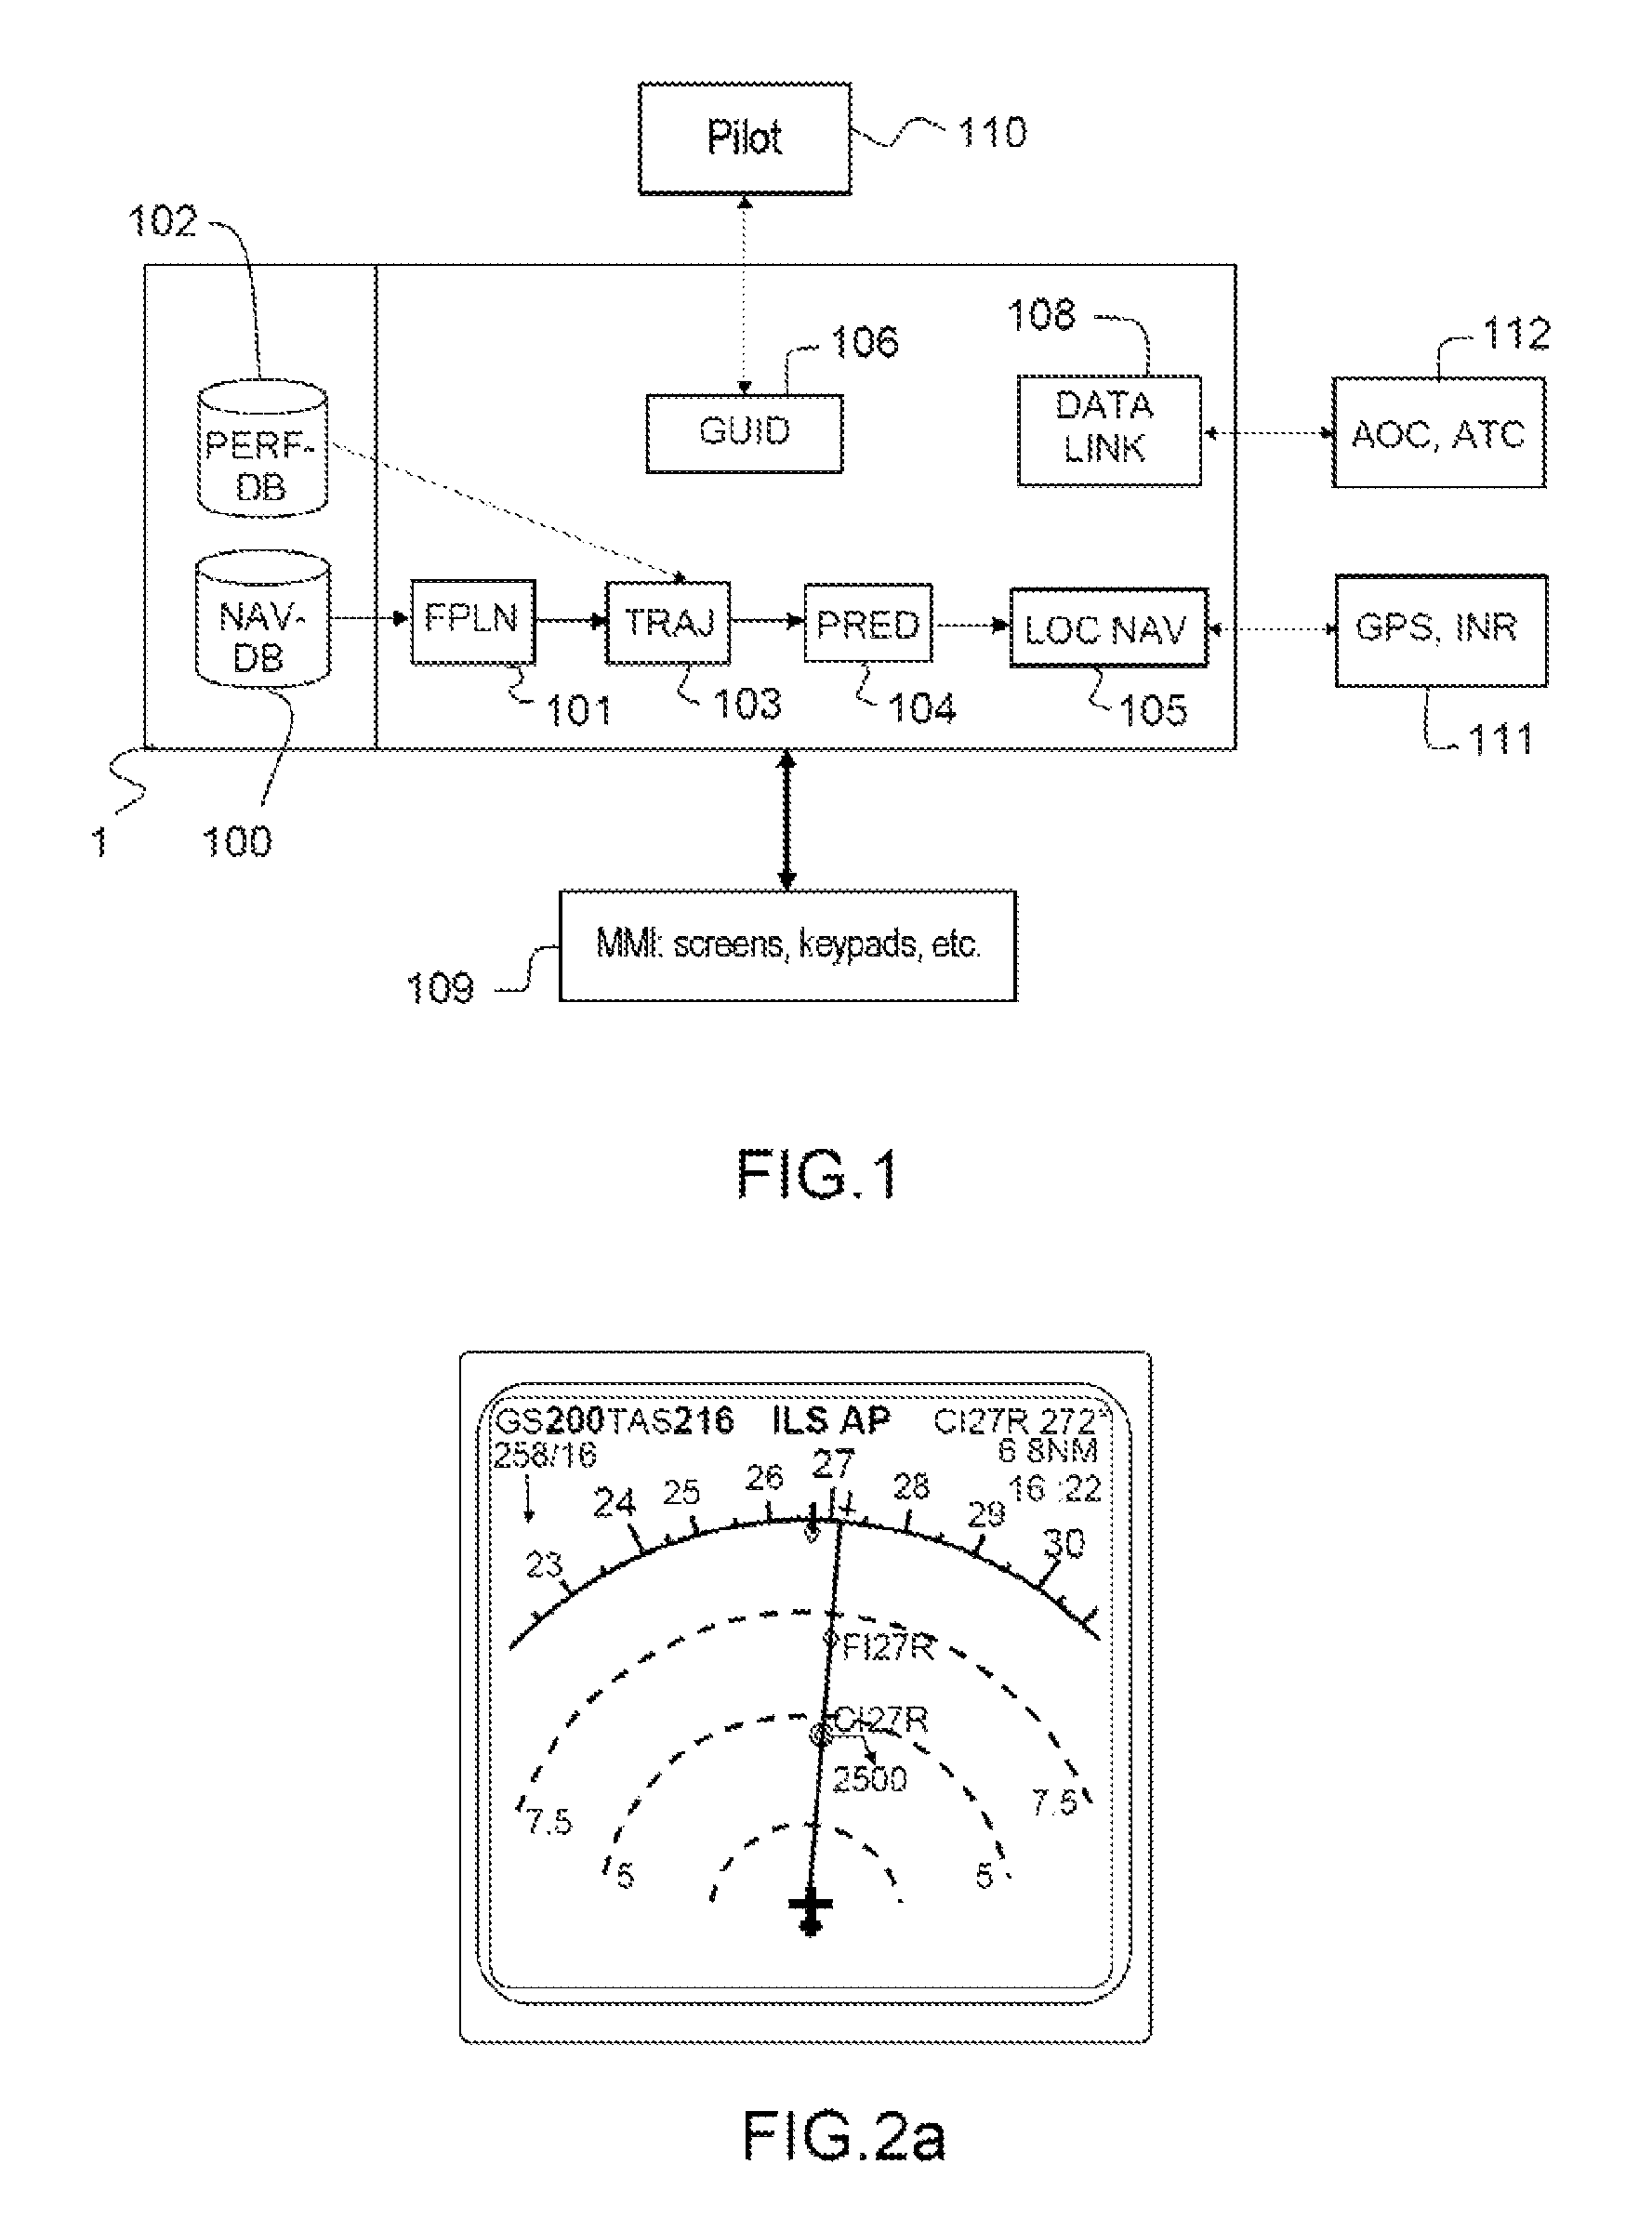 System for anticipating required navigation performance